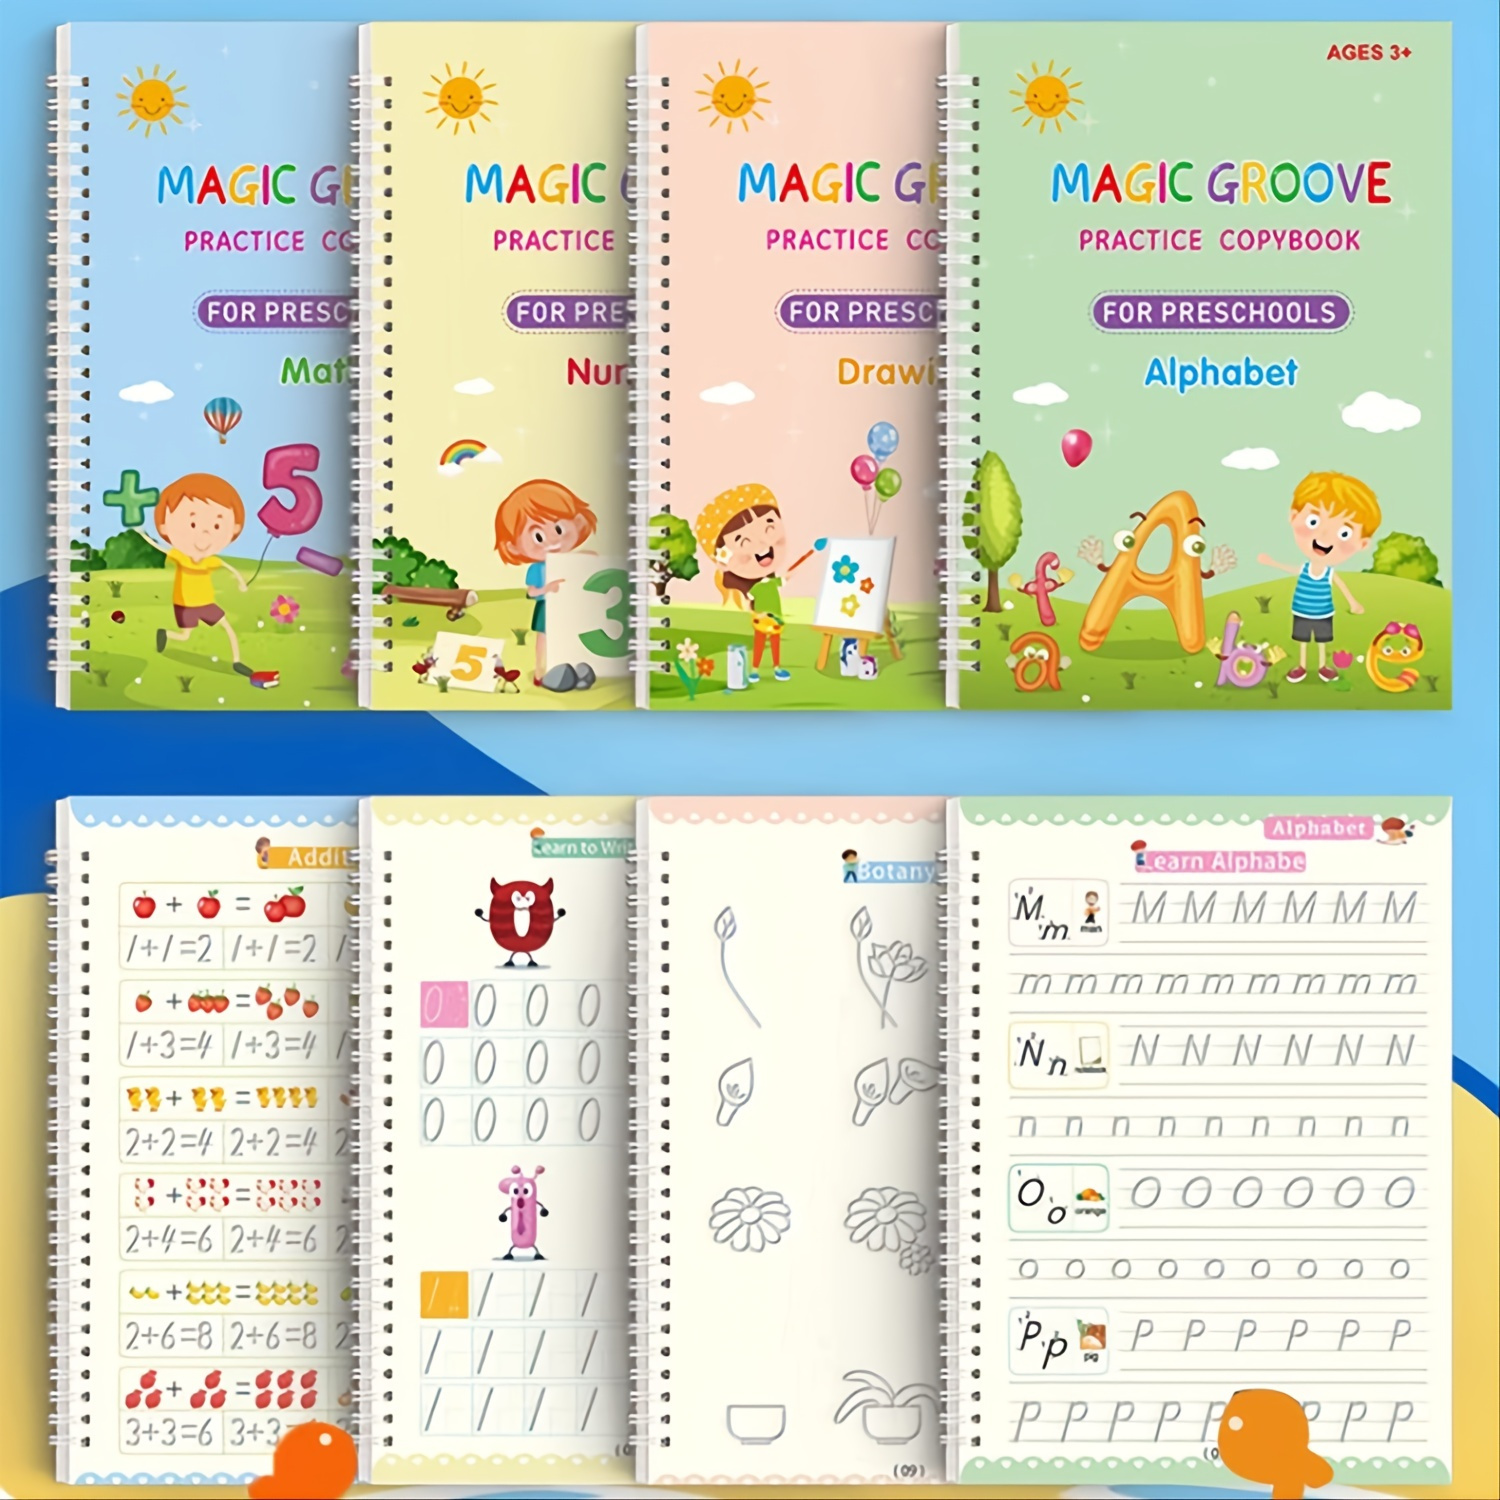 3D French Copybook Groove Magic Practice Copybook Children Learning Numbers  French Letter Calligraphy Writing Exercise Book - AliExpress